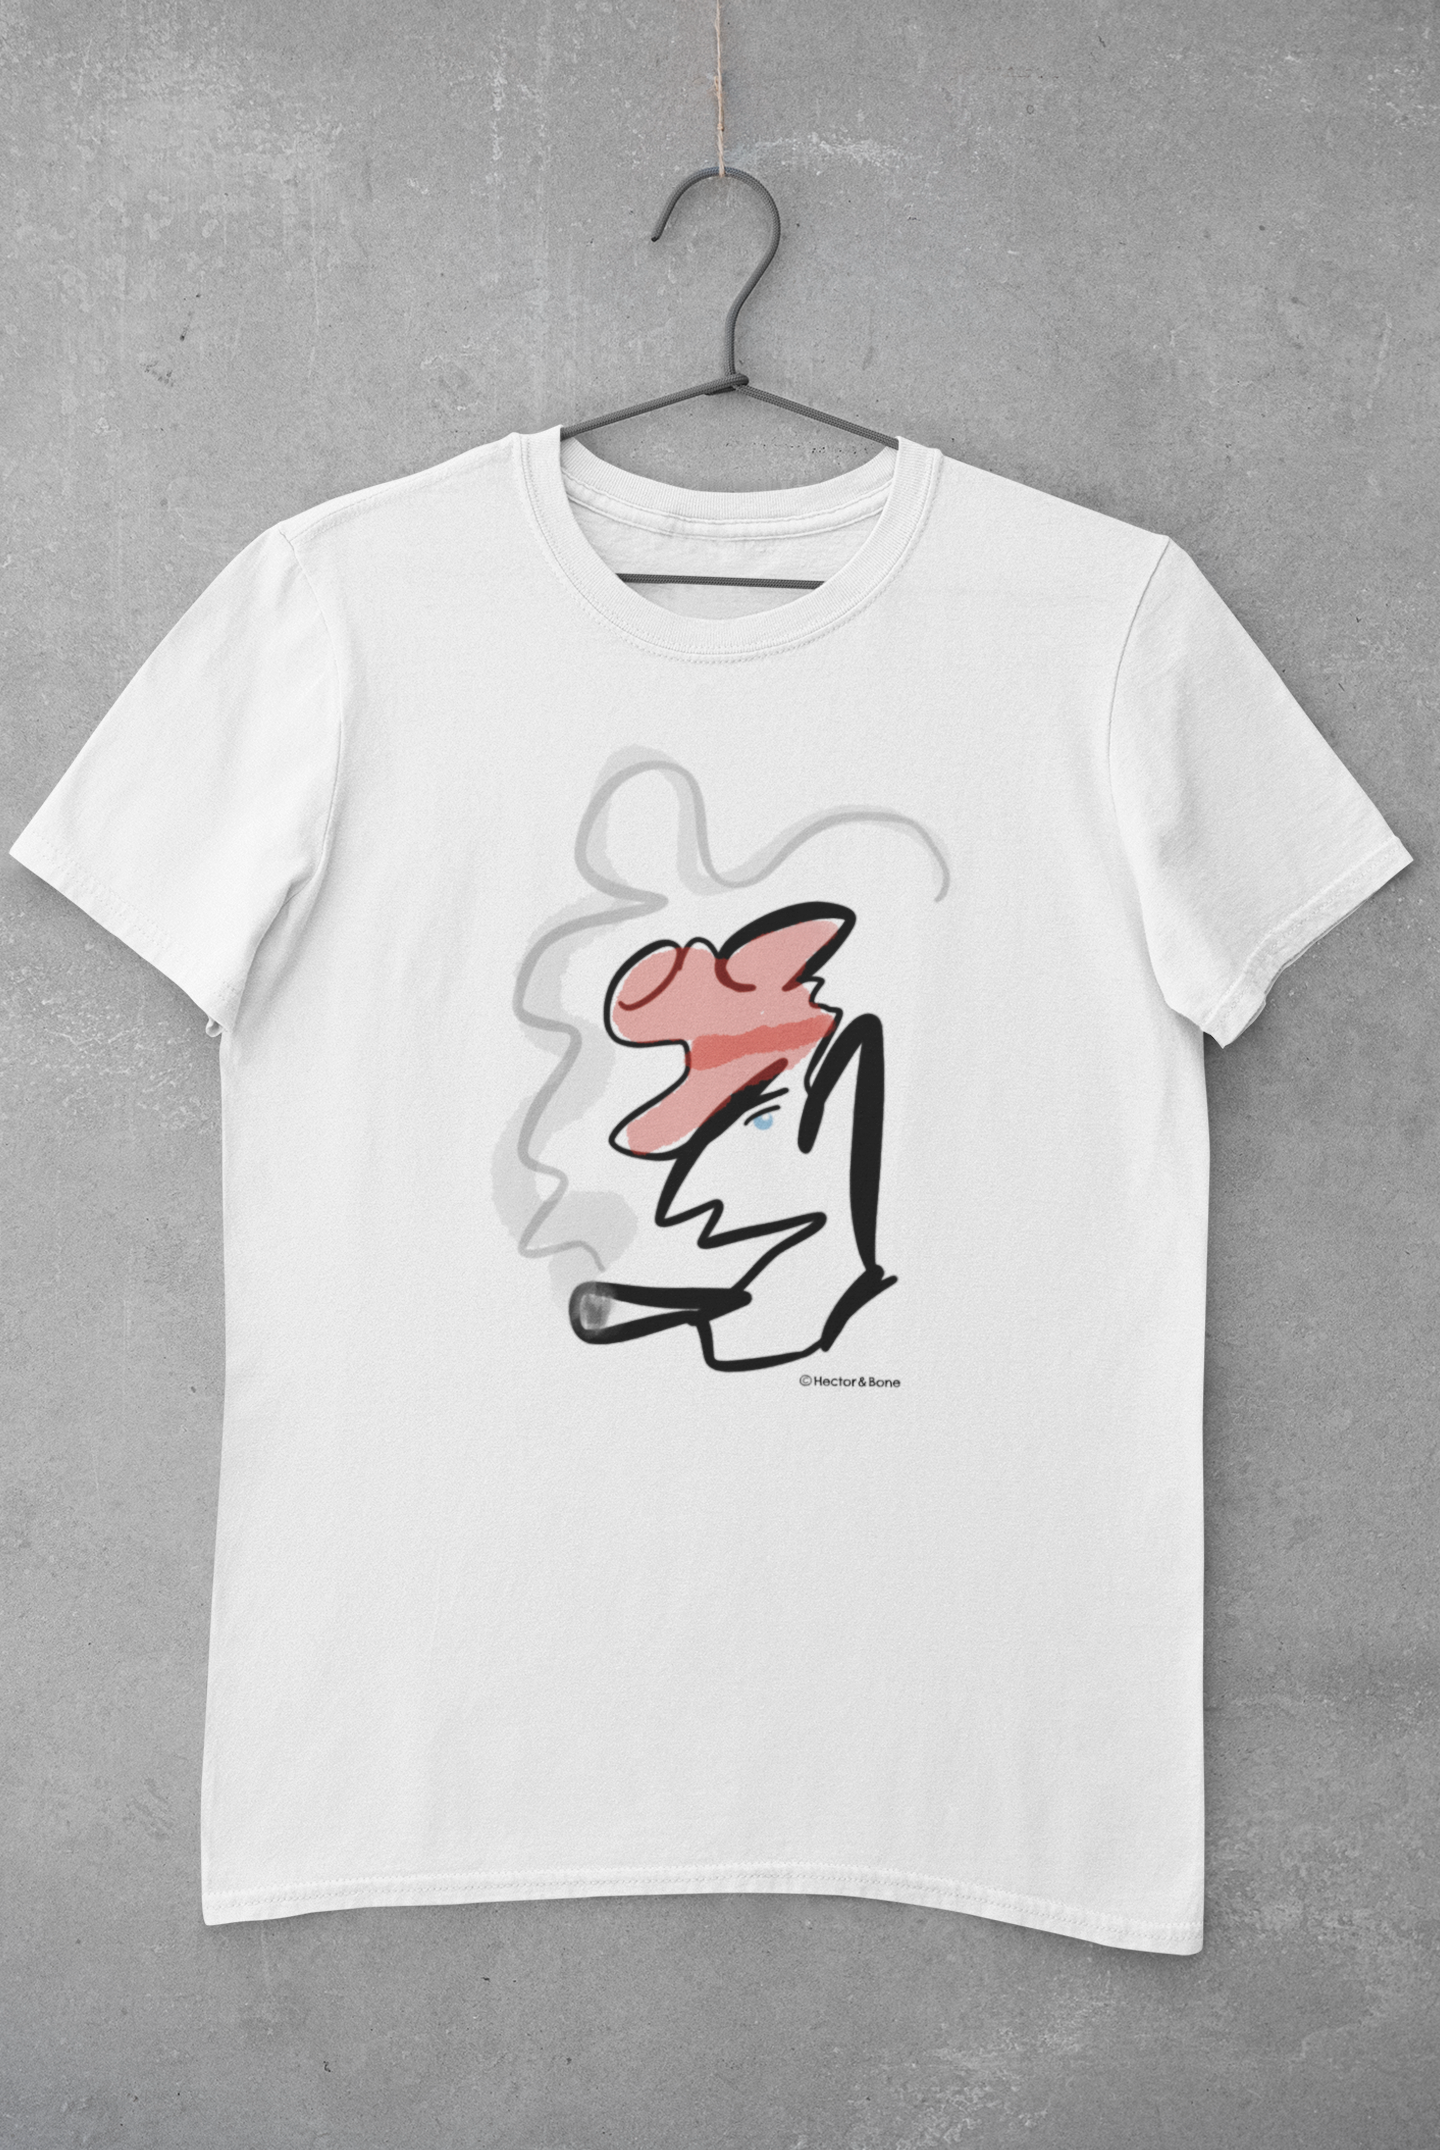 White quality vegan cotton t-shirt with Hector and Bone smoking man Monsieur Gaulois illustrated Parisian abstract t-shirt design